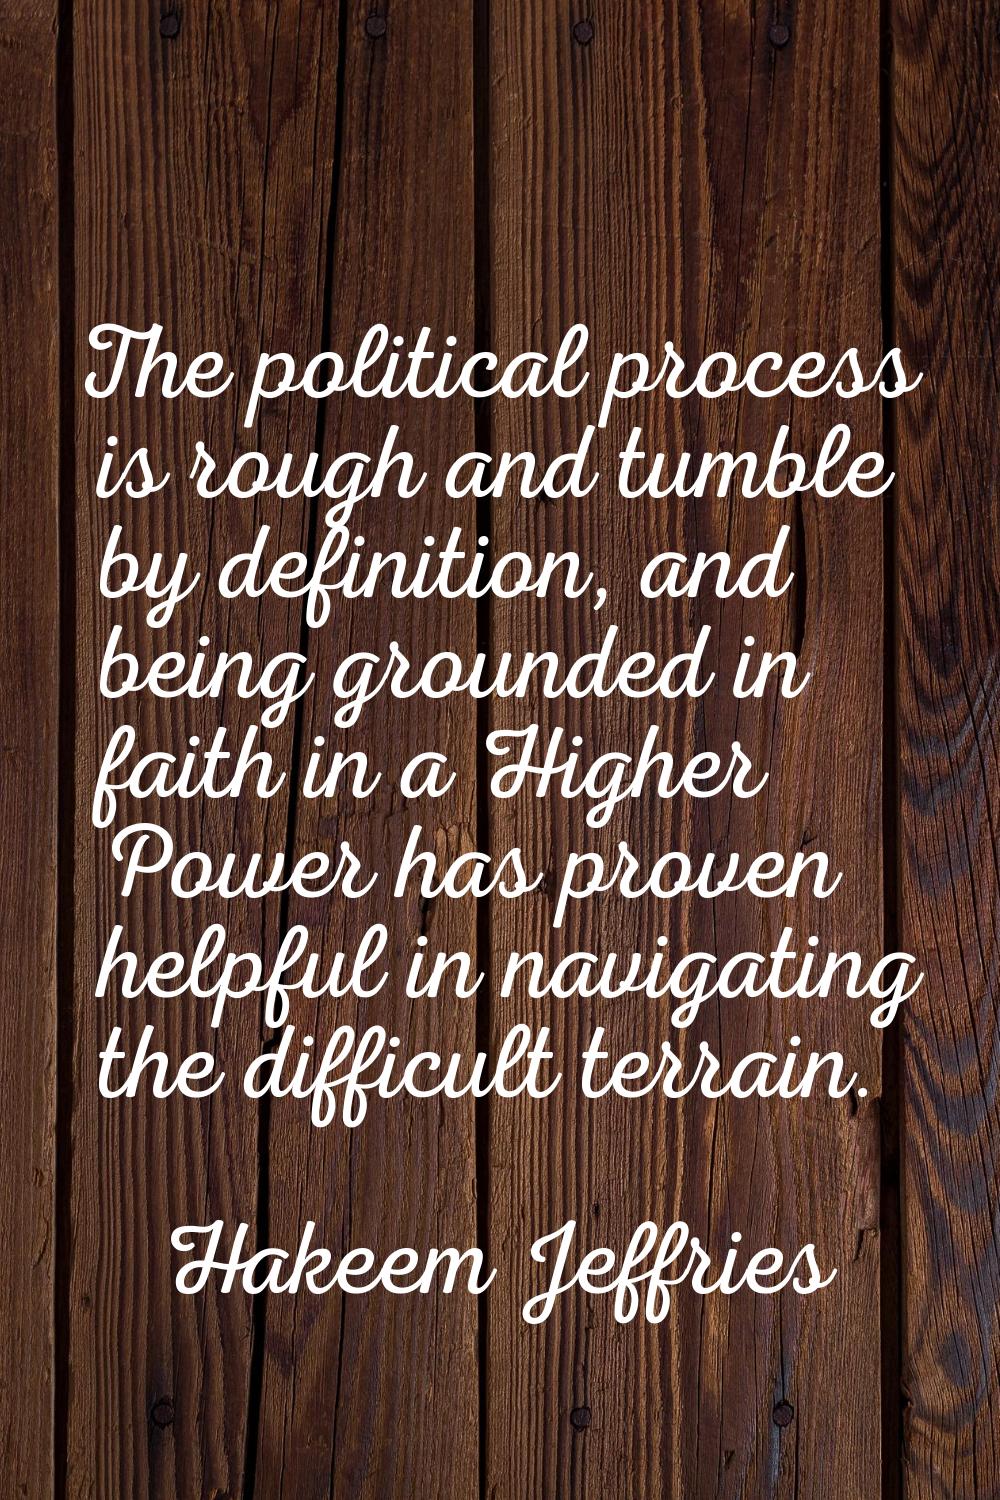 The political process is rough and tumble by definition, and being grounded in faith in a Higher Po